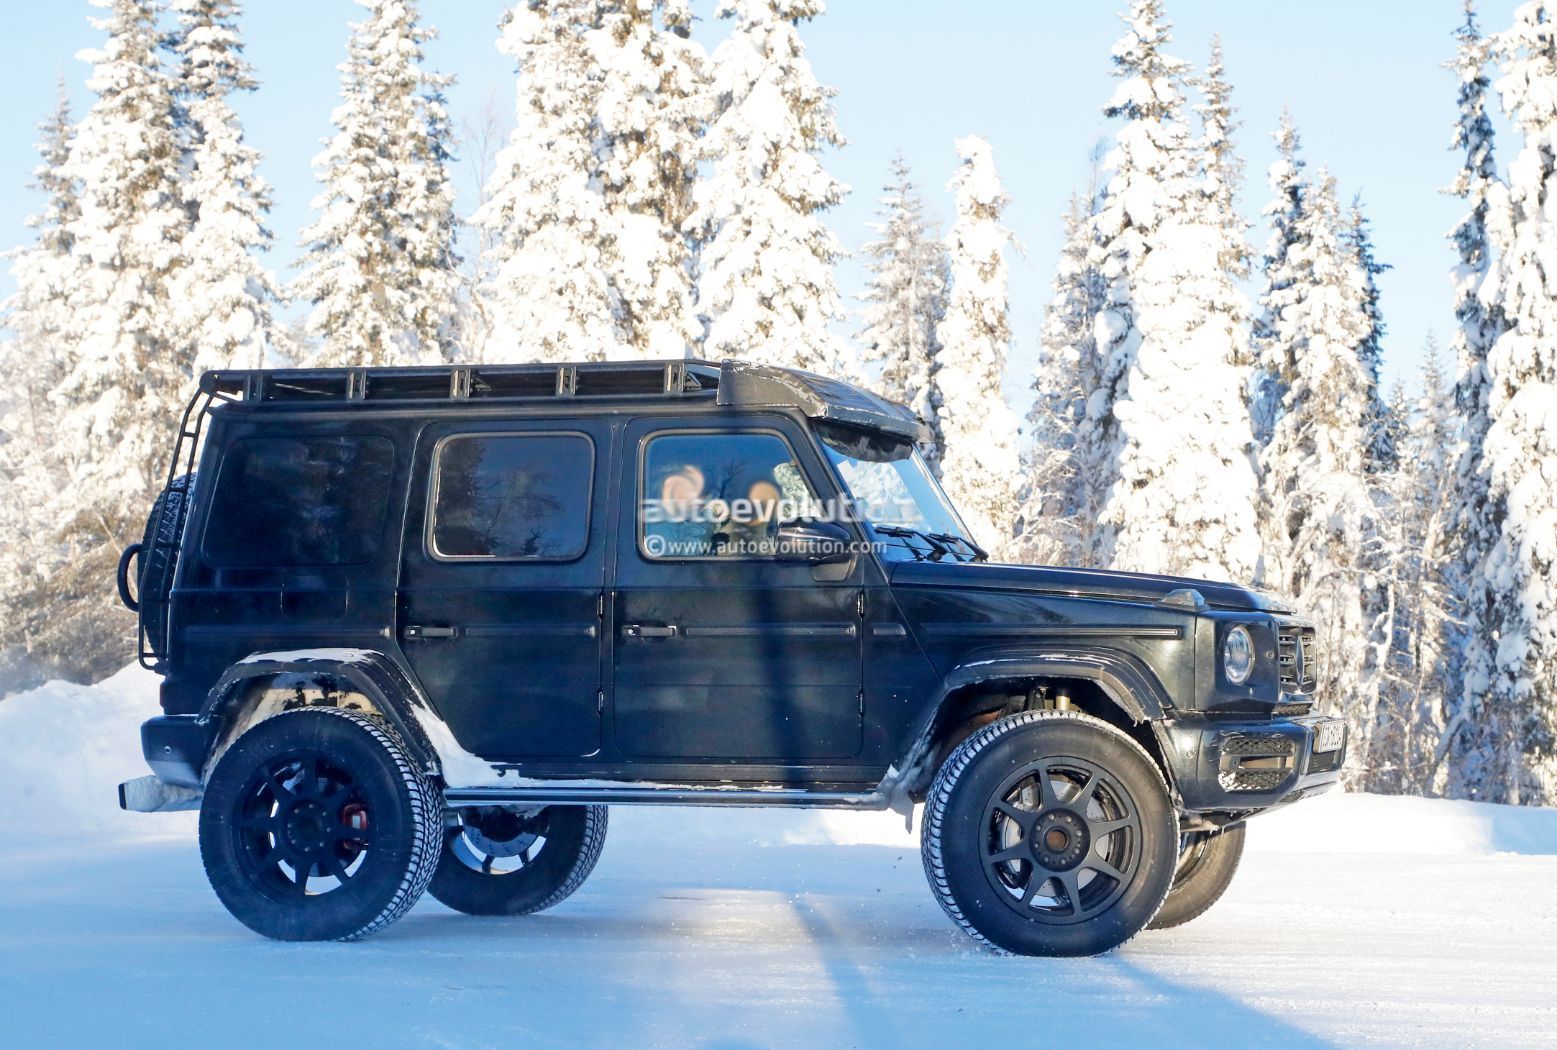 New Mercedes Benz G Class 4x4 Squared Is Almost Here Looks Majestic In The Snow 10 